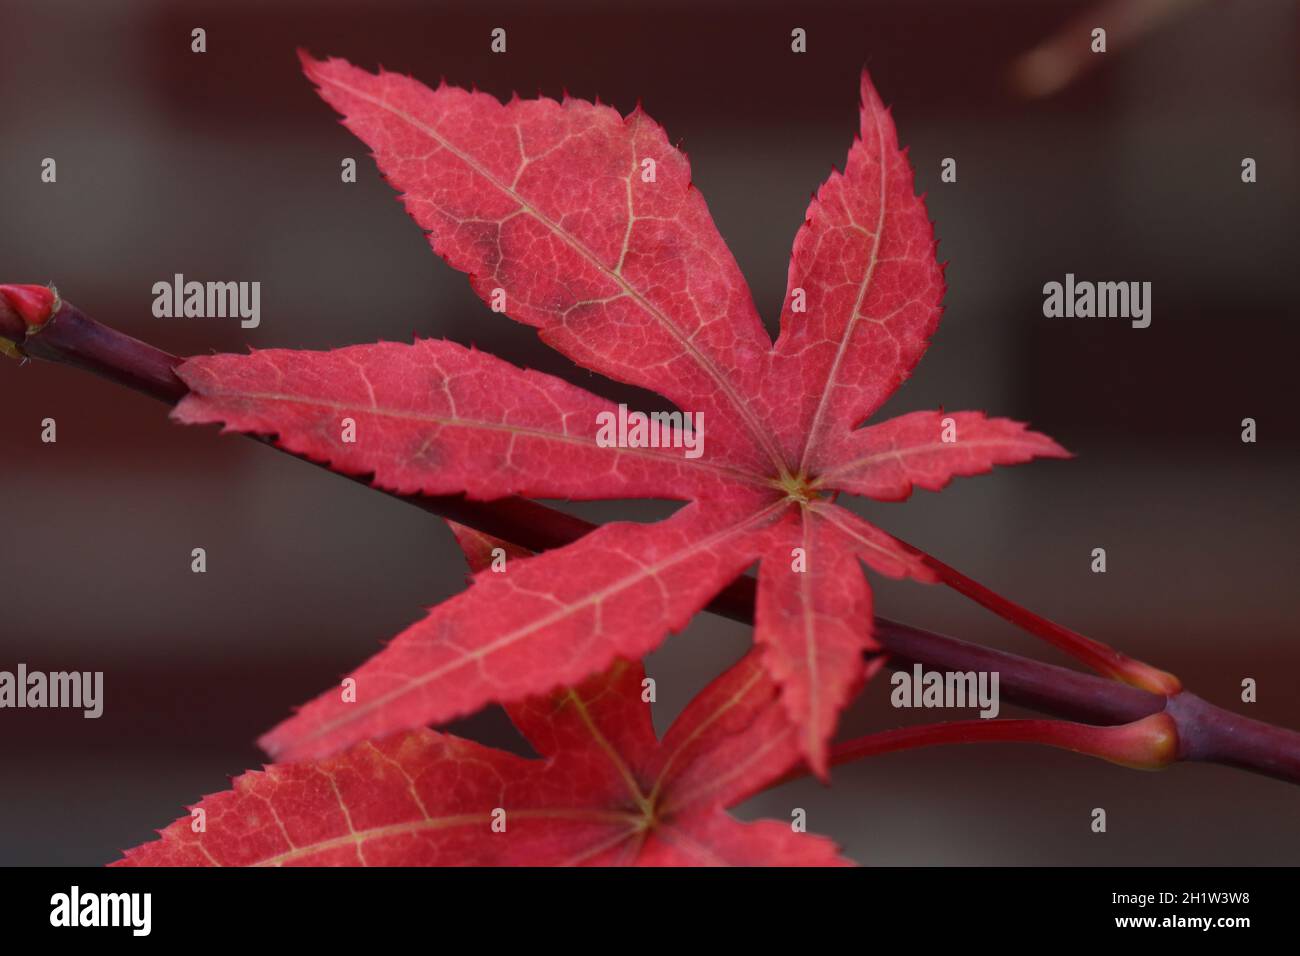 Close-up of an autumnally colored pretty red leaf from the Japanese maple tree Stock Photo